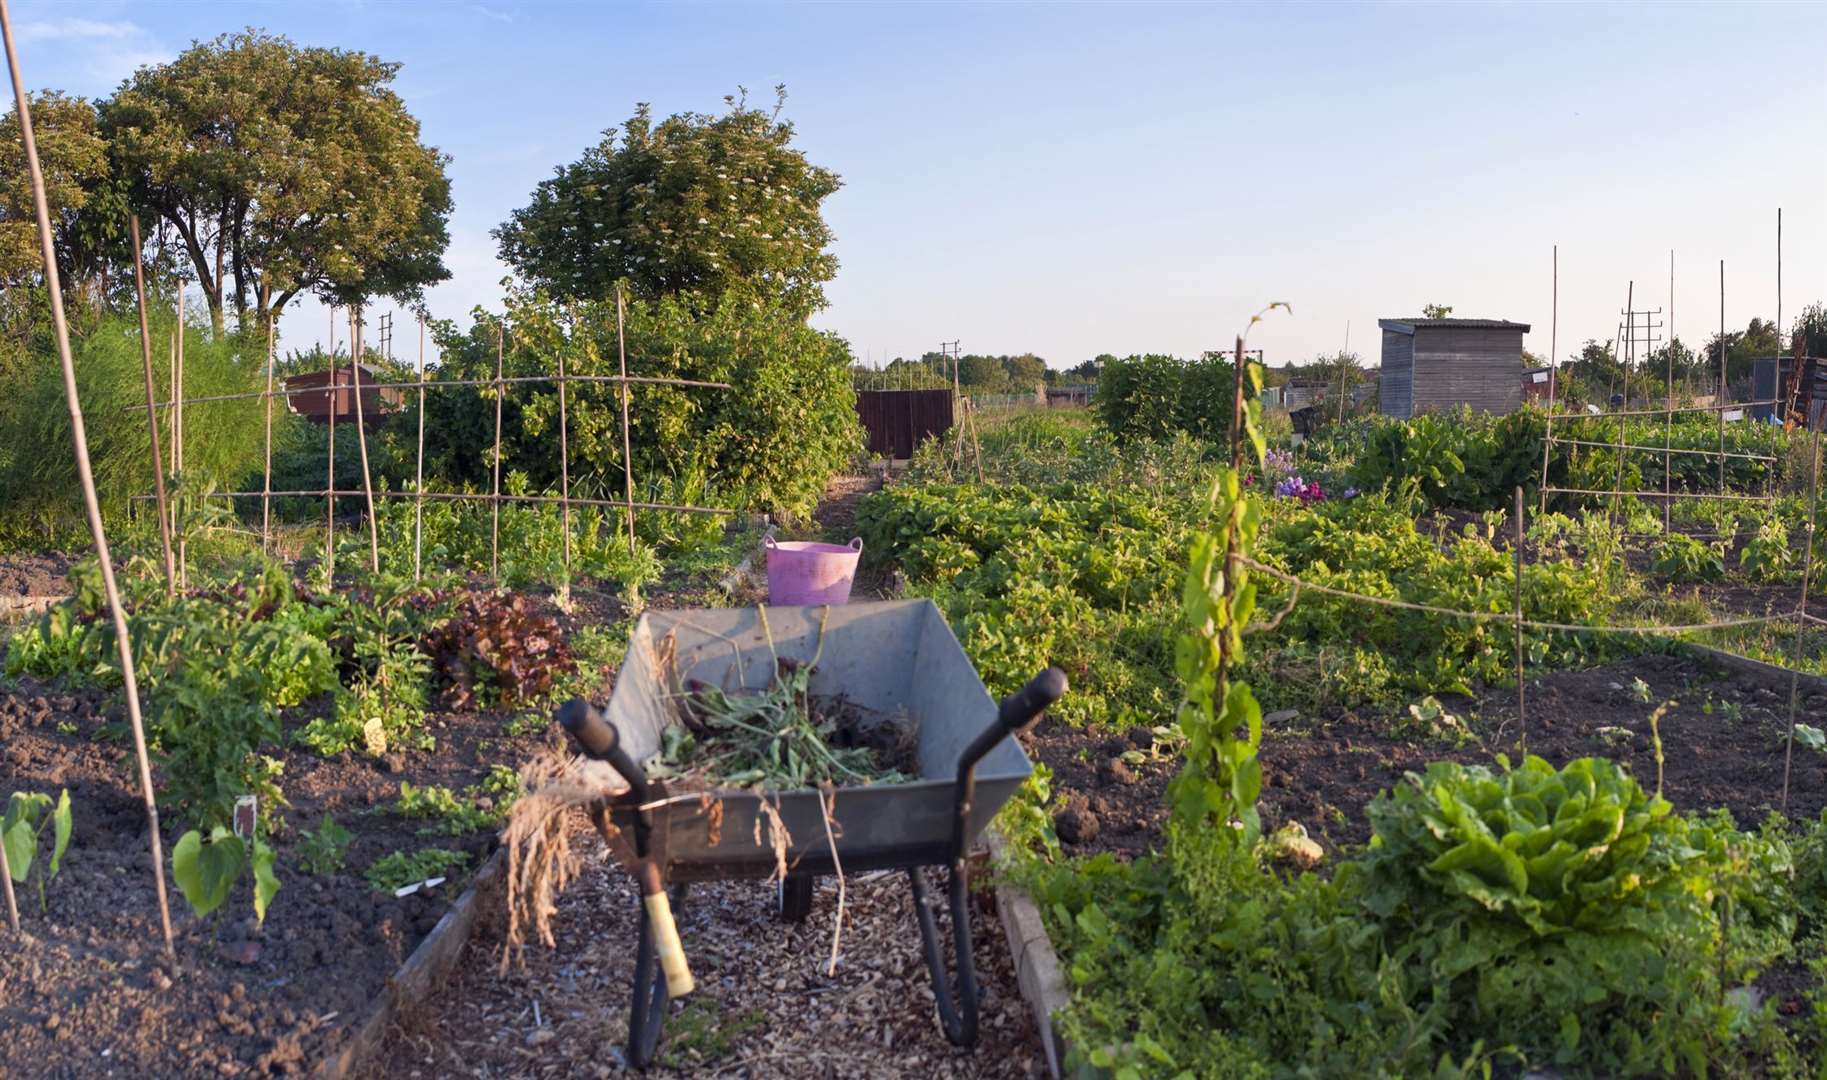 Visit an allotment as part of the Edible England theme